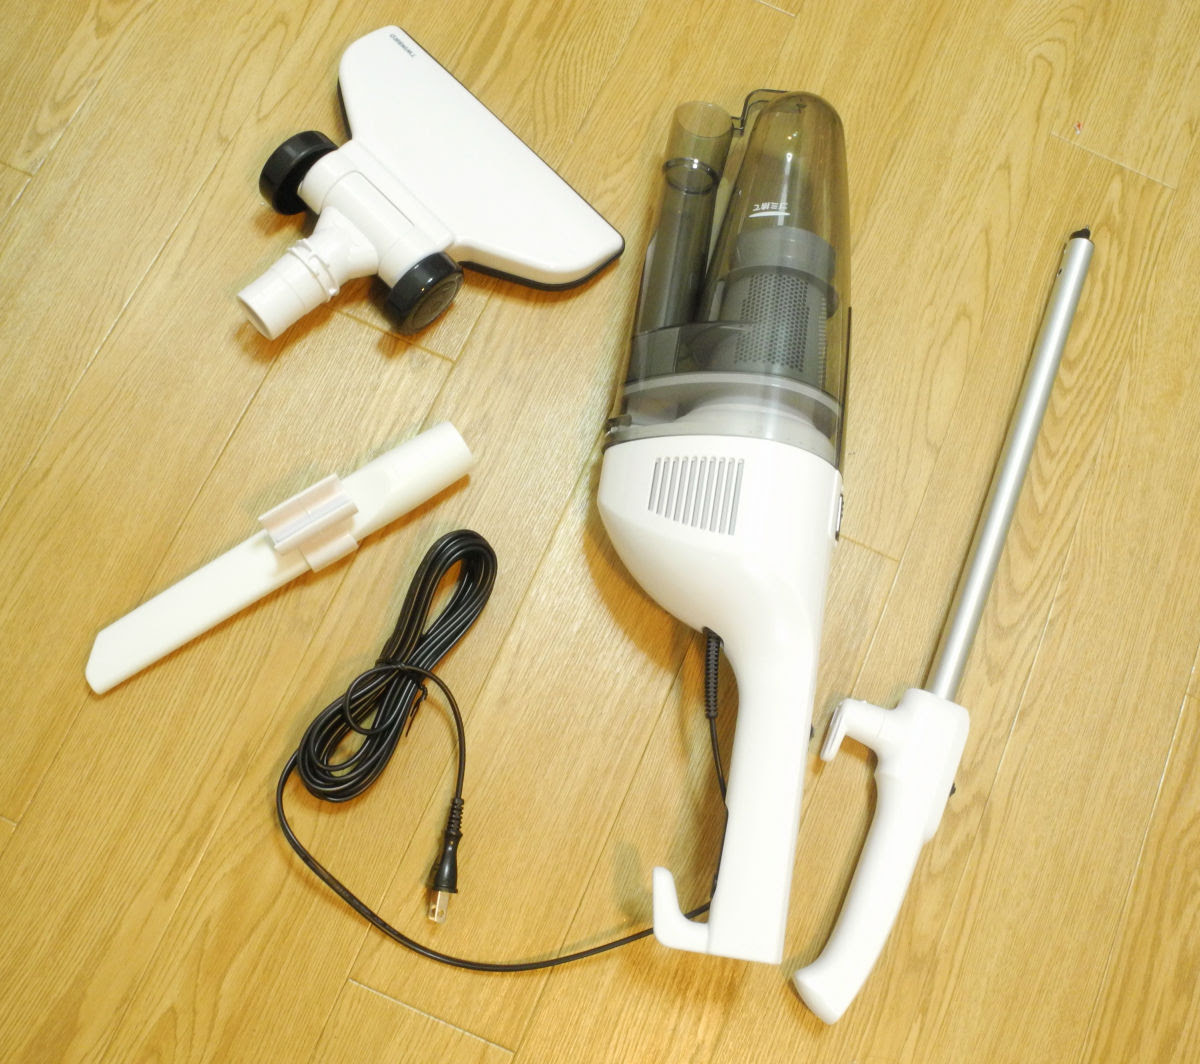 Gi meg beskjed når prisen synker. Cyclone Vacuum Cleaner Twinbird Tc E123sbk Review Available Within 3000 Yen Review Gigazine